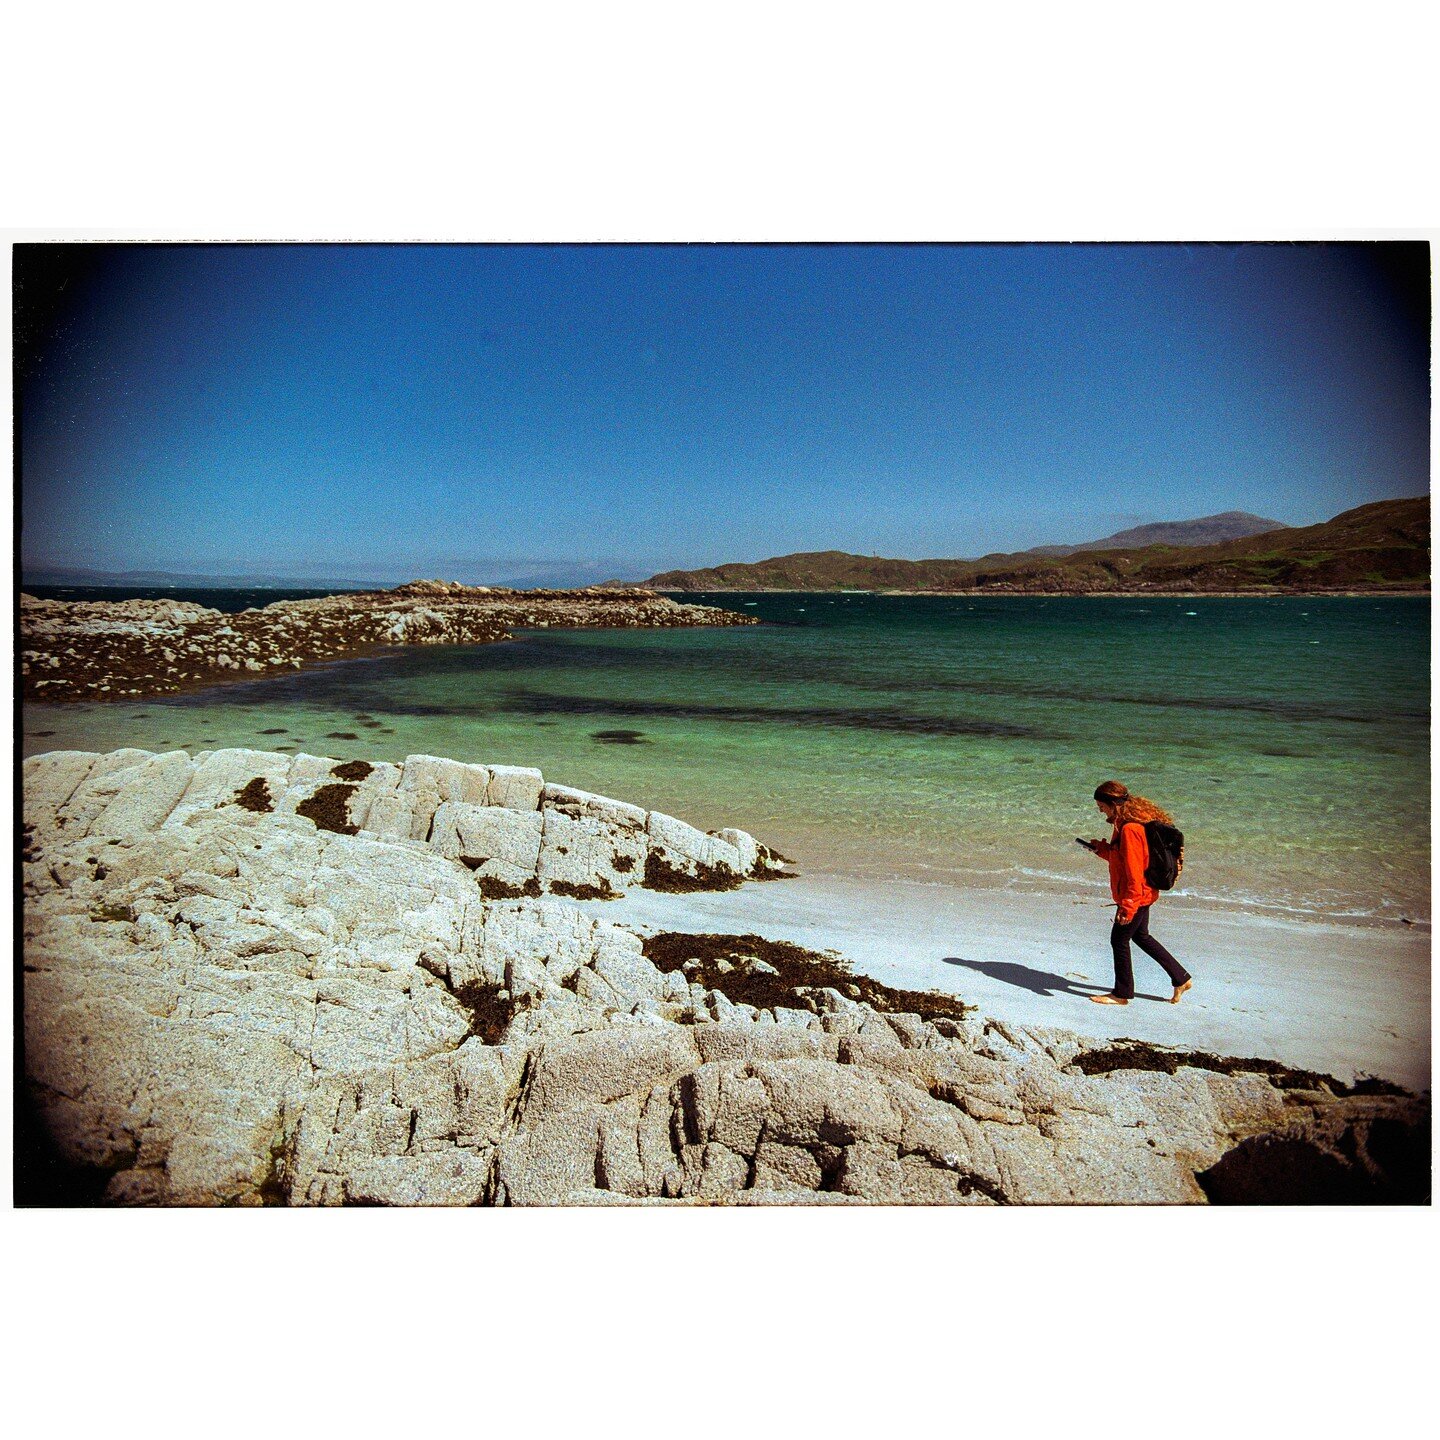 NEVER REALLY HERE #13

Whilst walking on a white sandy beach, a woman looks down to her phone, perhaps to the photos she has just taken, perhaps posting them on social media.

Digitized colour film negative - 2023

#scotland #scotlandphotography #sco